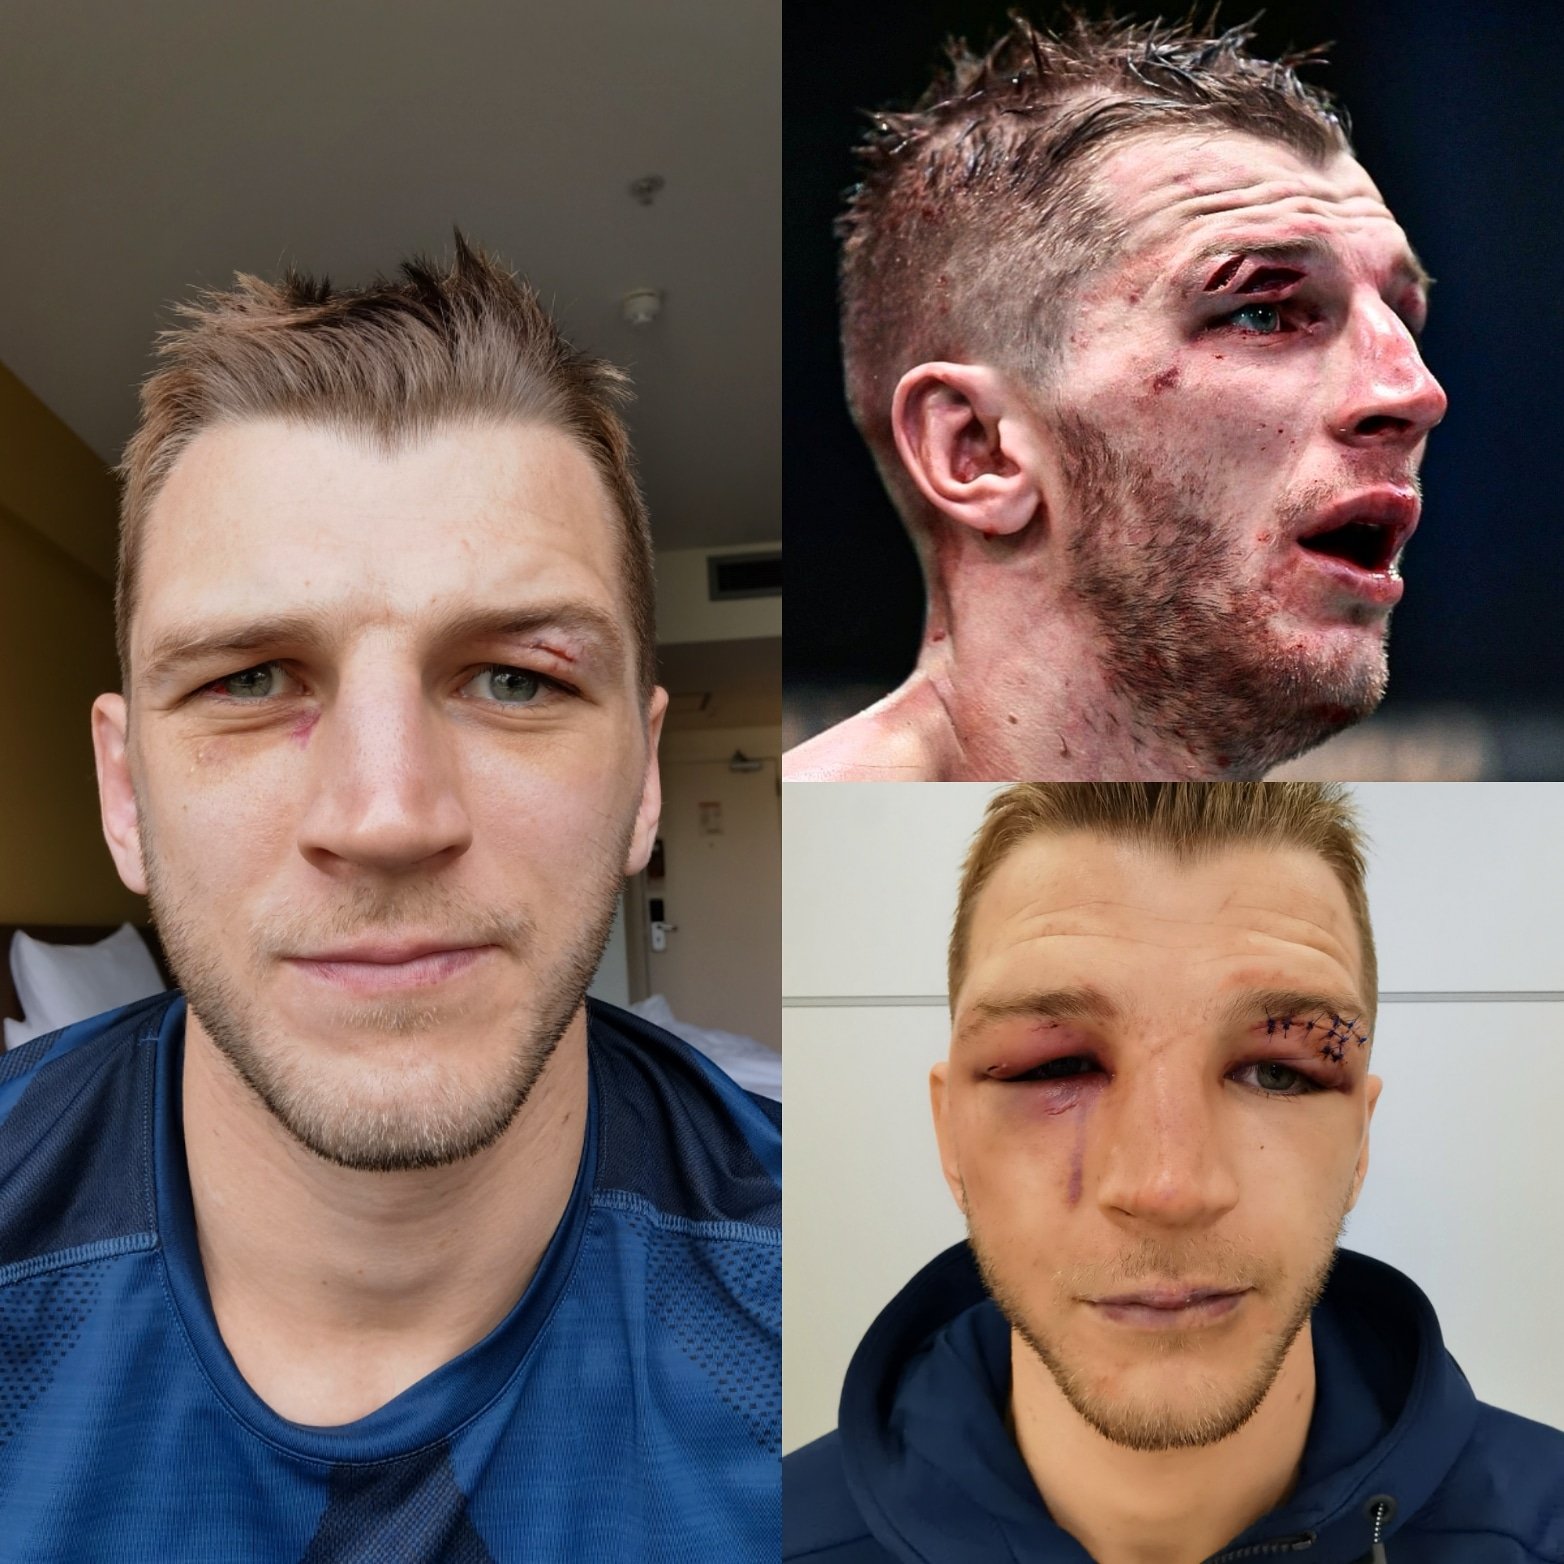 Dan Hooker showed off his recovery after losing to Dustin Poirier